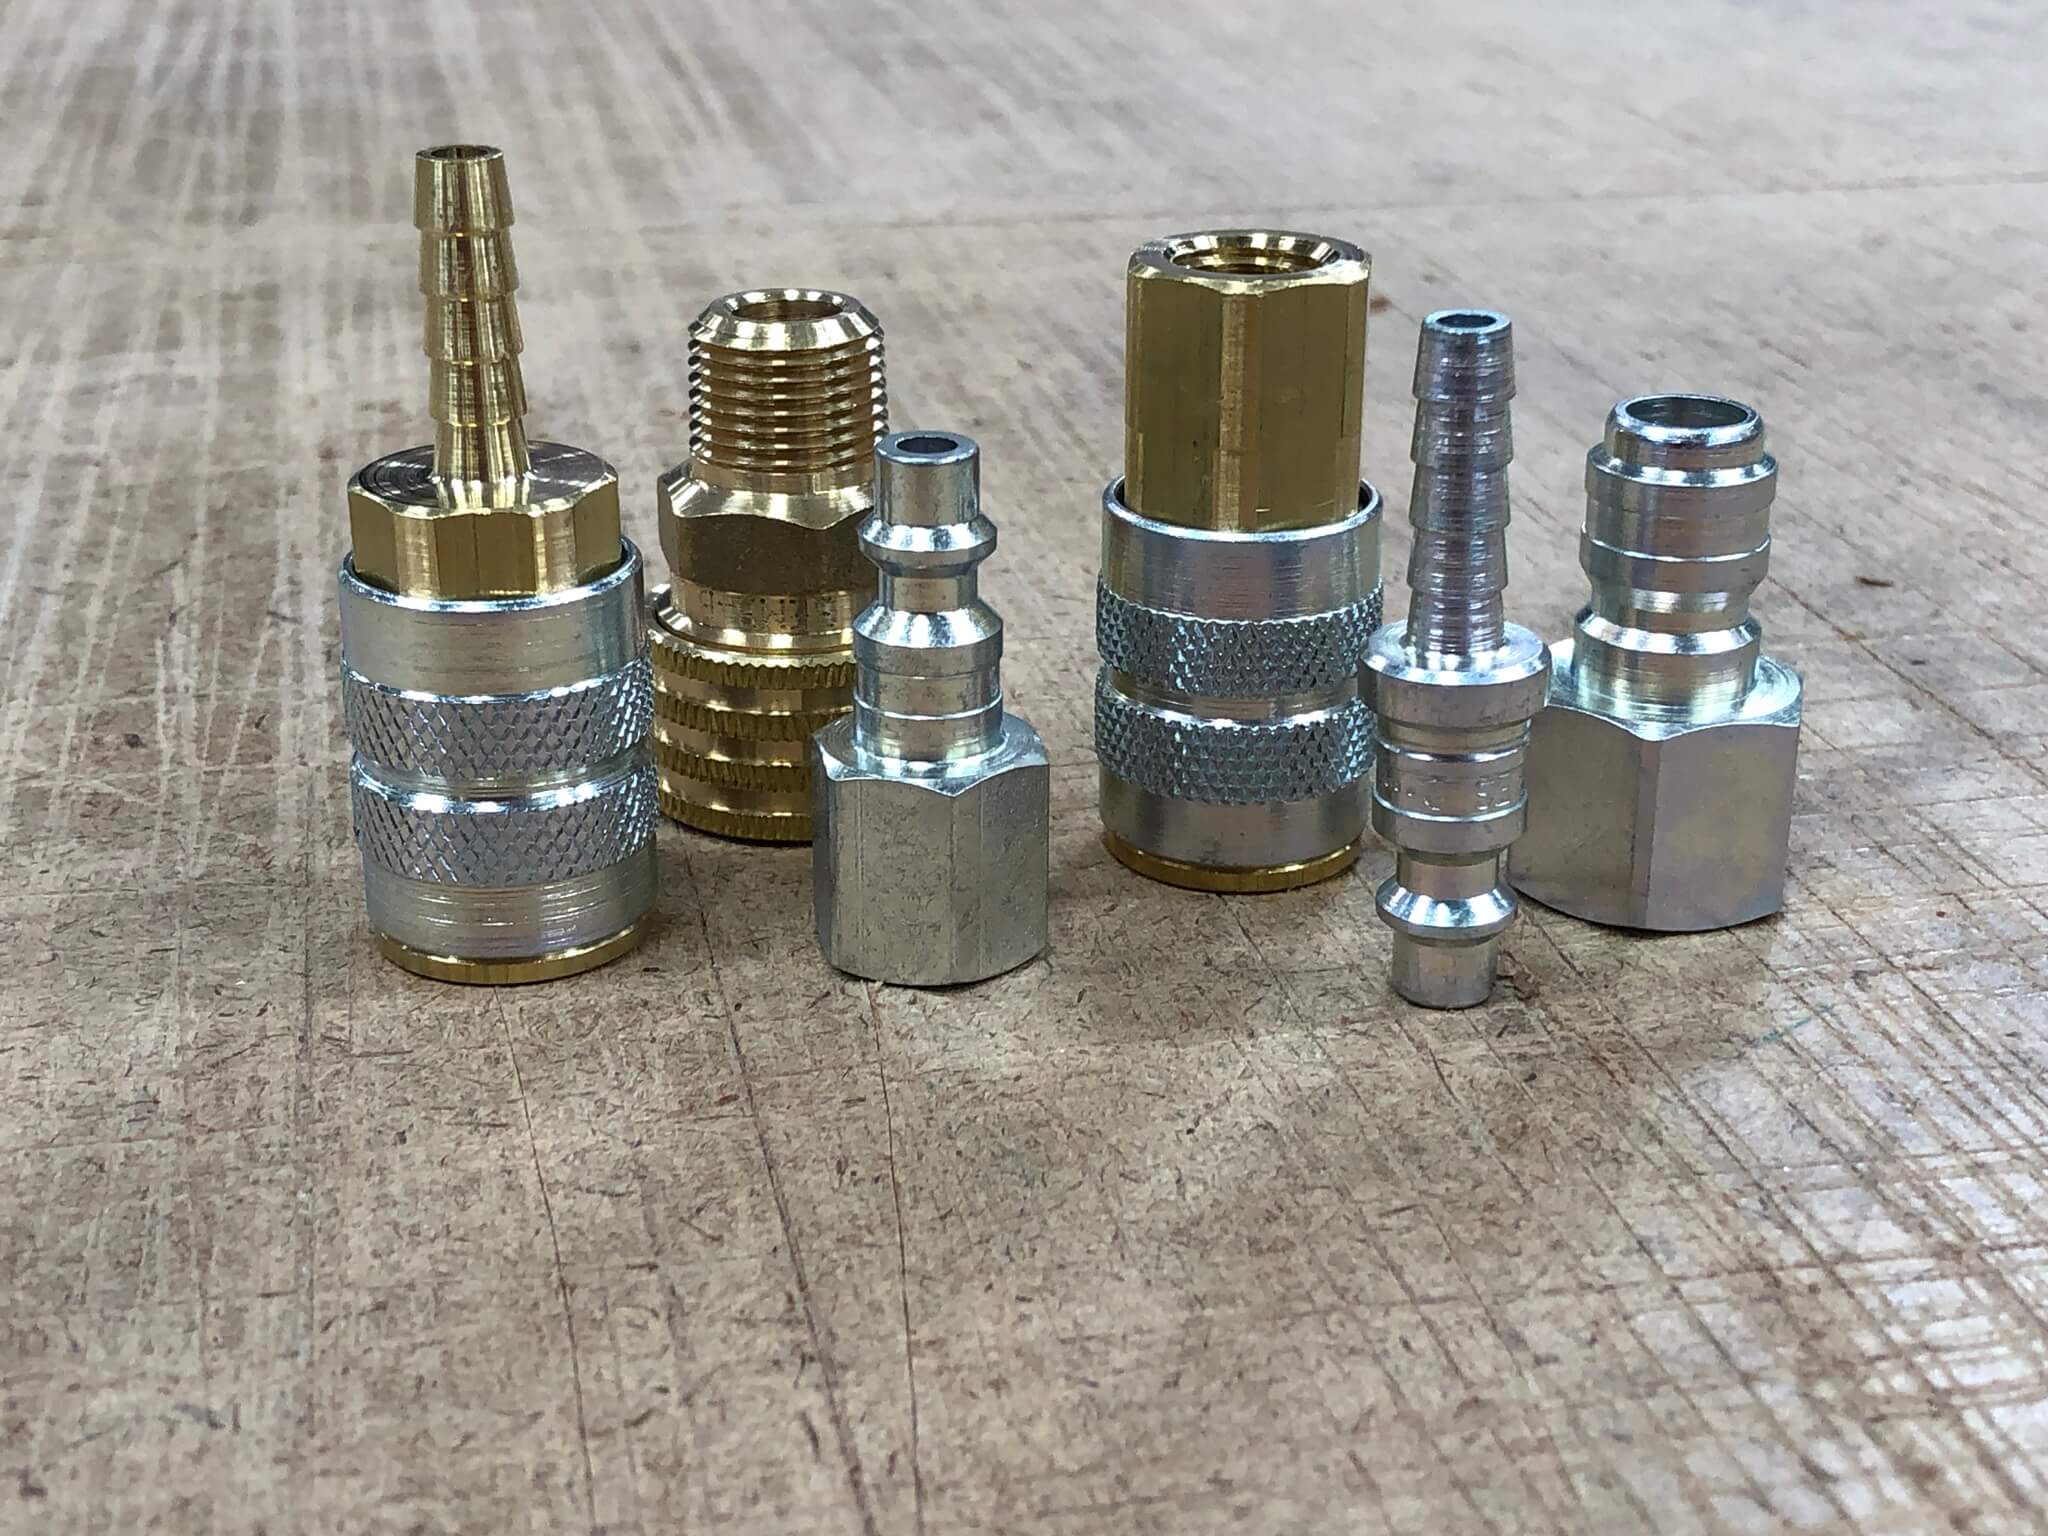 Brass Barbed Fittings